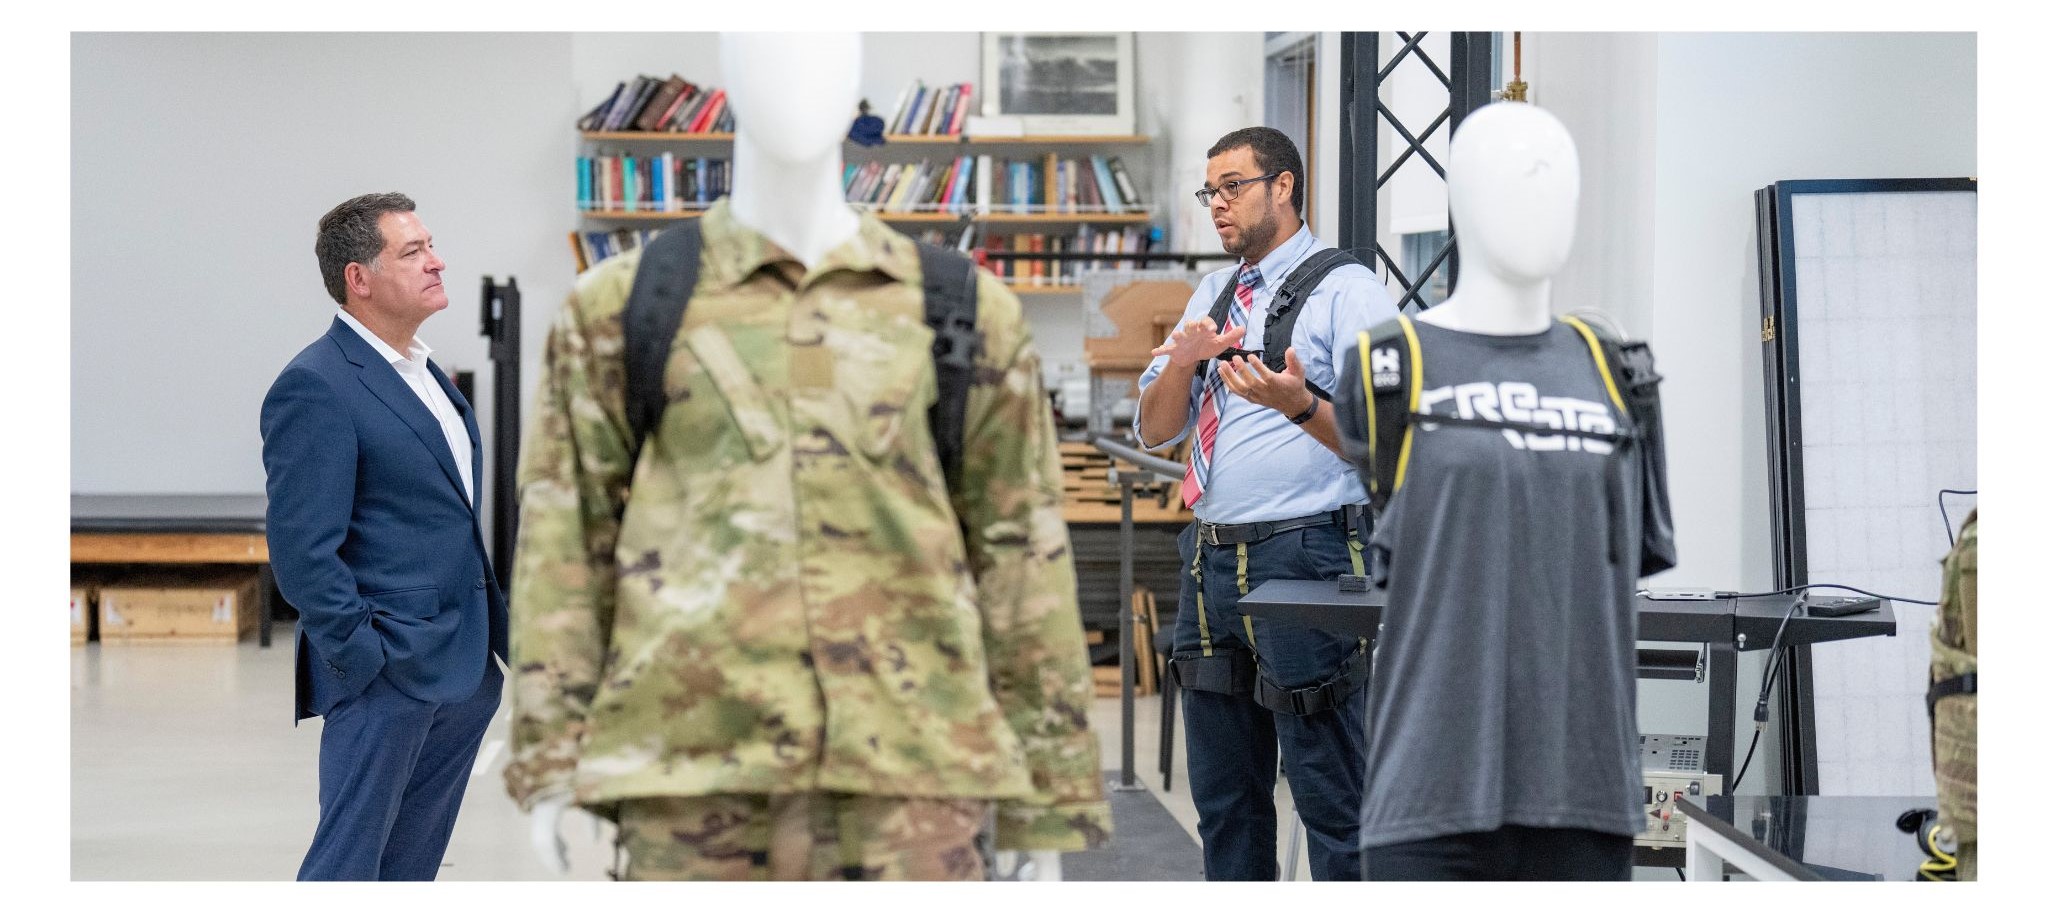 Rep. Green gets an in-depth, hands-on presentation of the lift-assist exosuit—one of the innovations that received support from the Army Futures Command Pathfinder partnership. (Vanderbilt University)